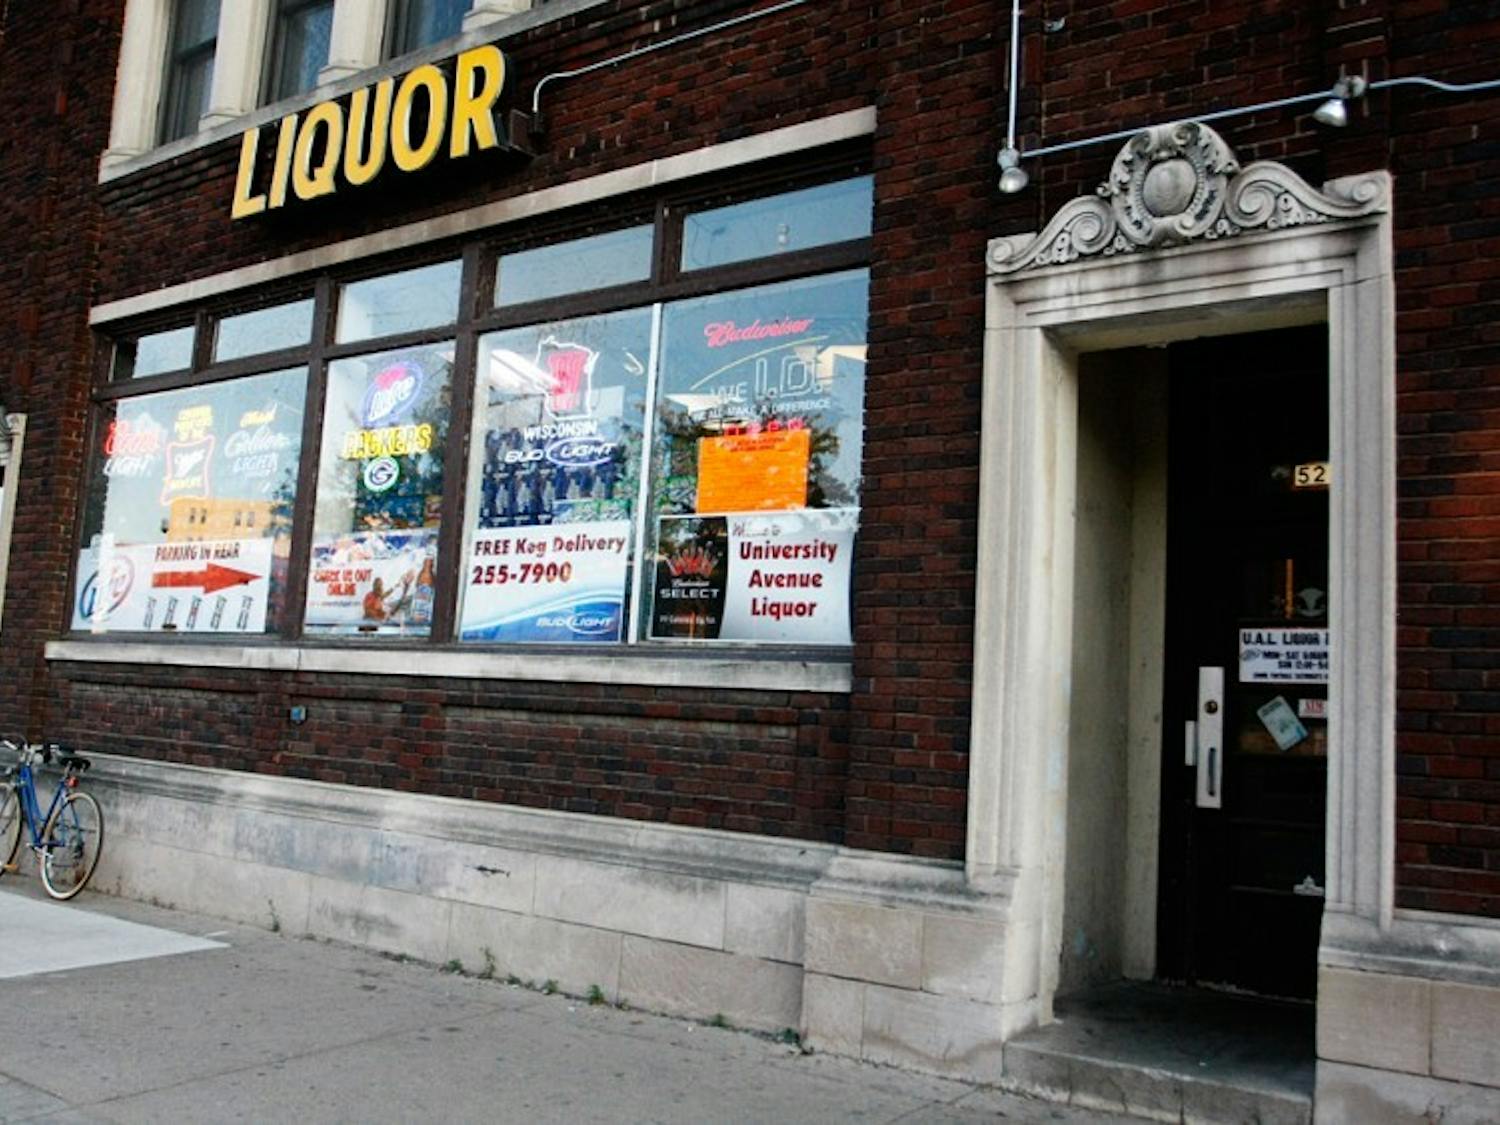 Downtown liquor stores receive punishments from city